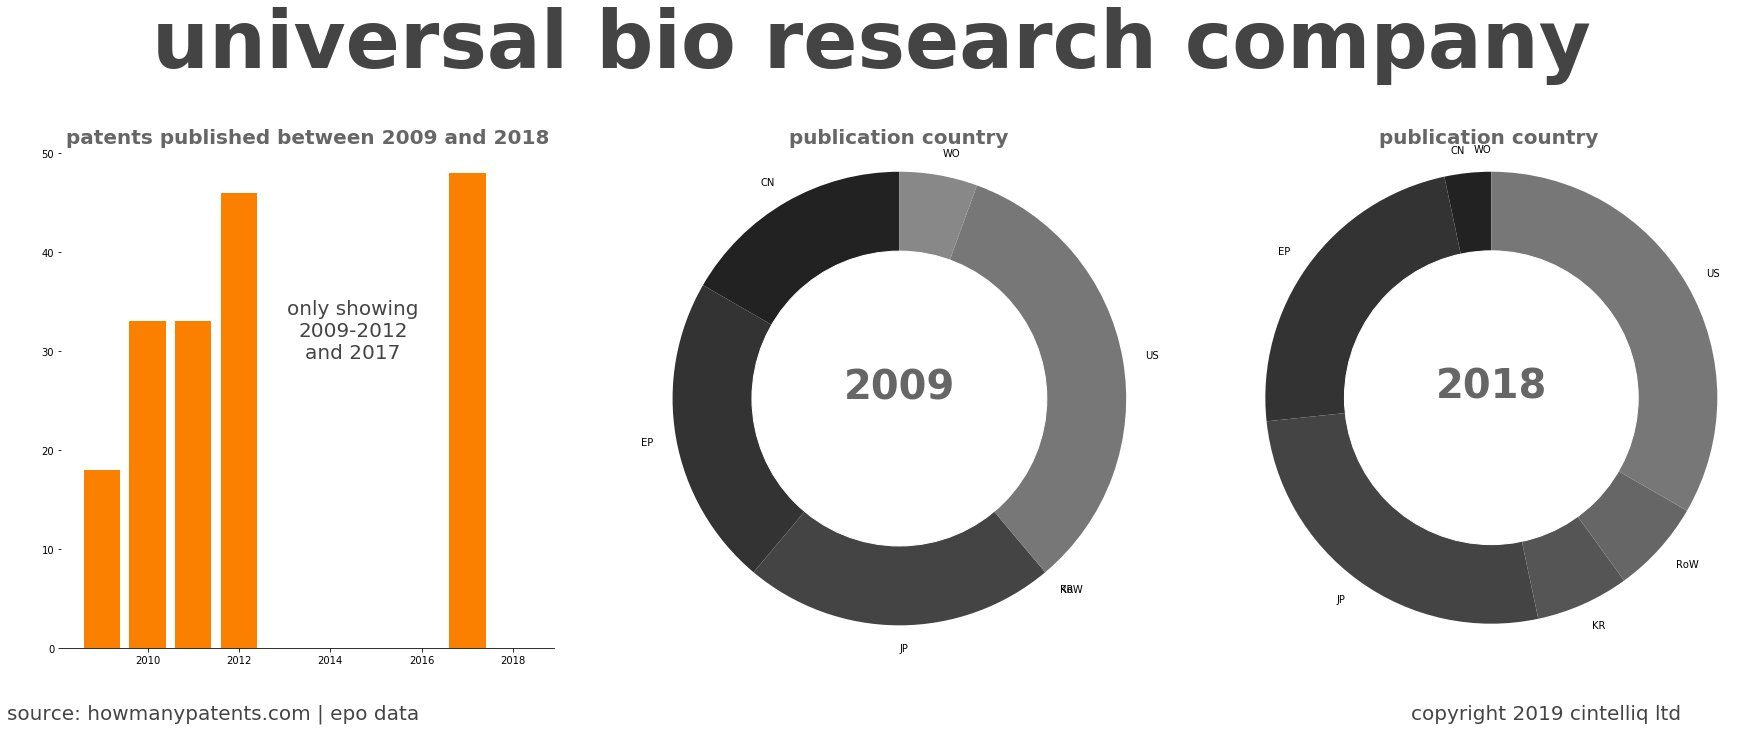 summary of patents for Universal Bio Research Company